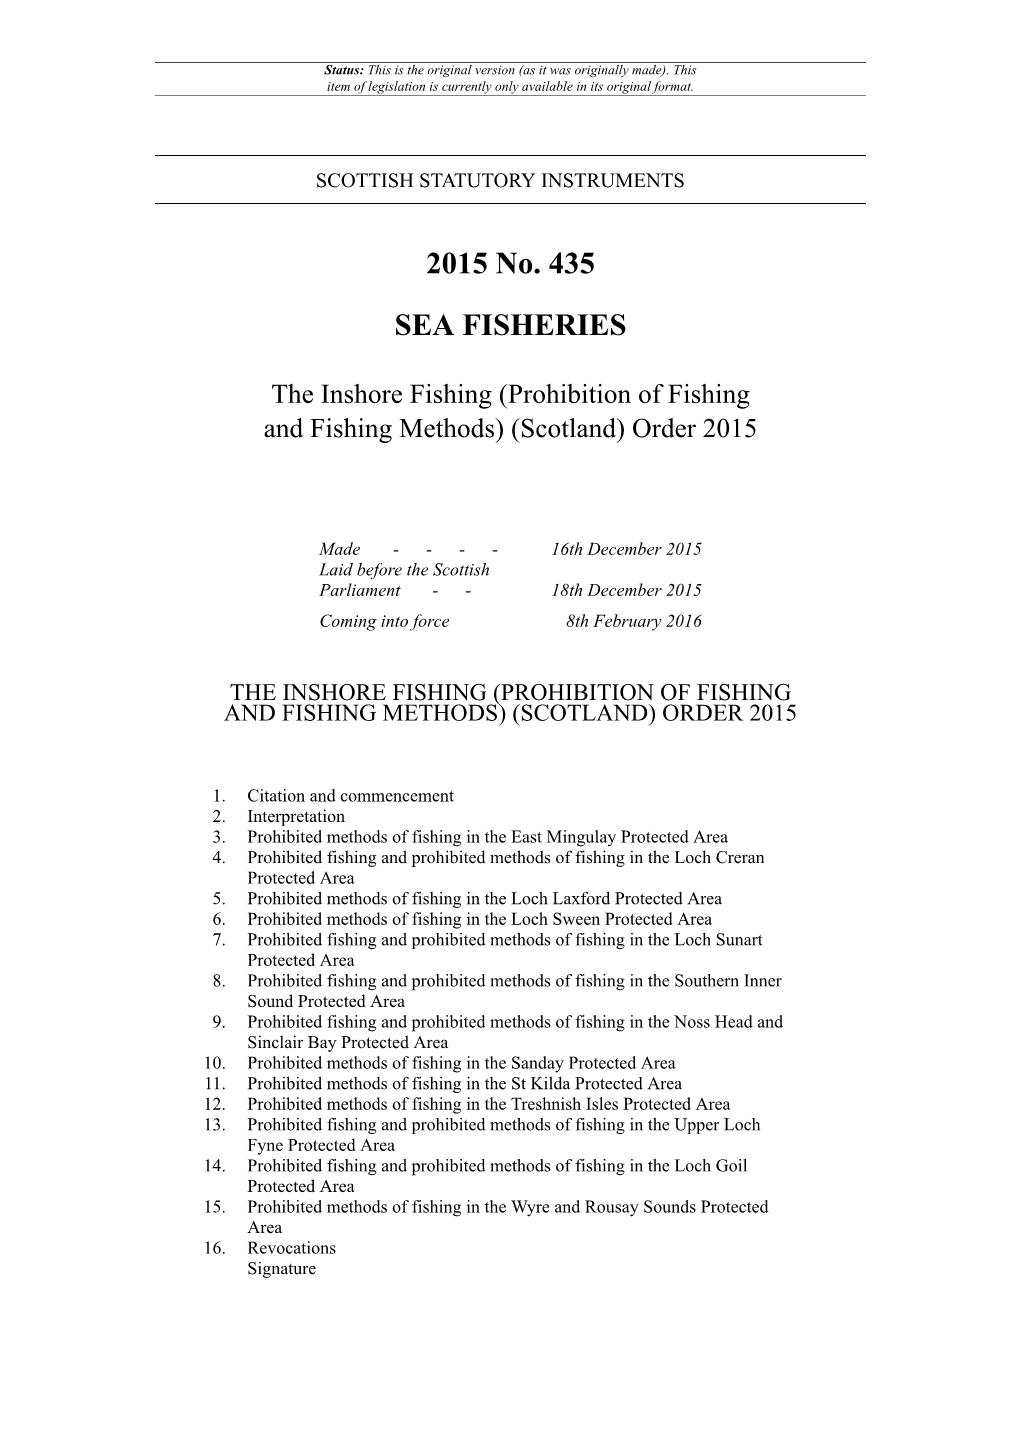 The Inshore Fishing (Prohibition of Fishing and Fishing Methods) (Scotland) Order 2015